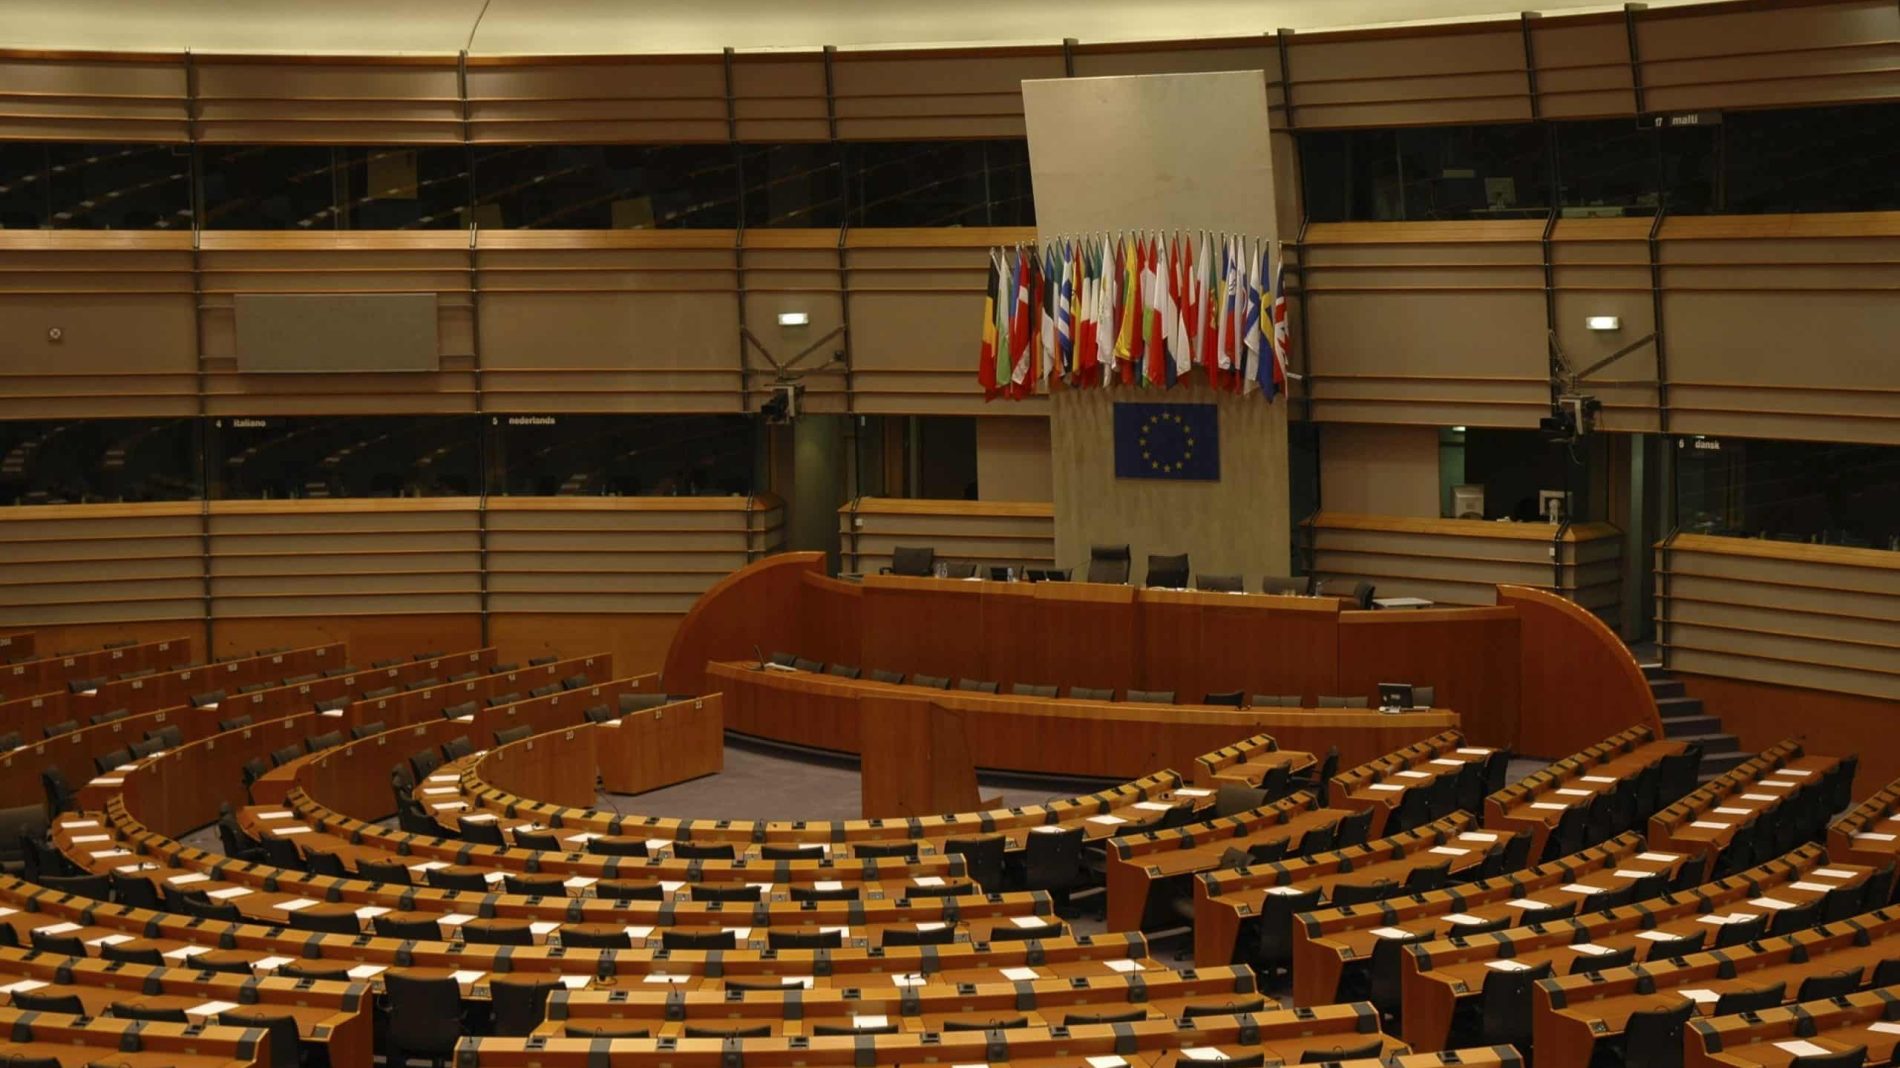 The European Parliament's hemicycle